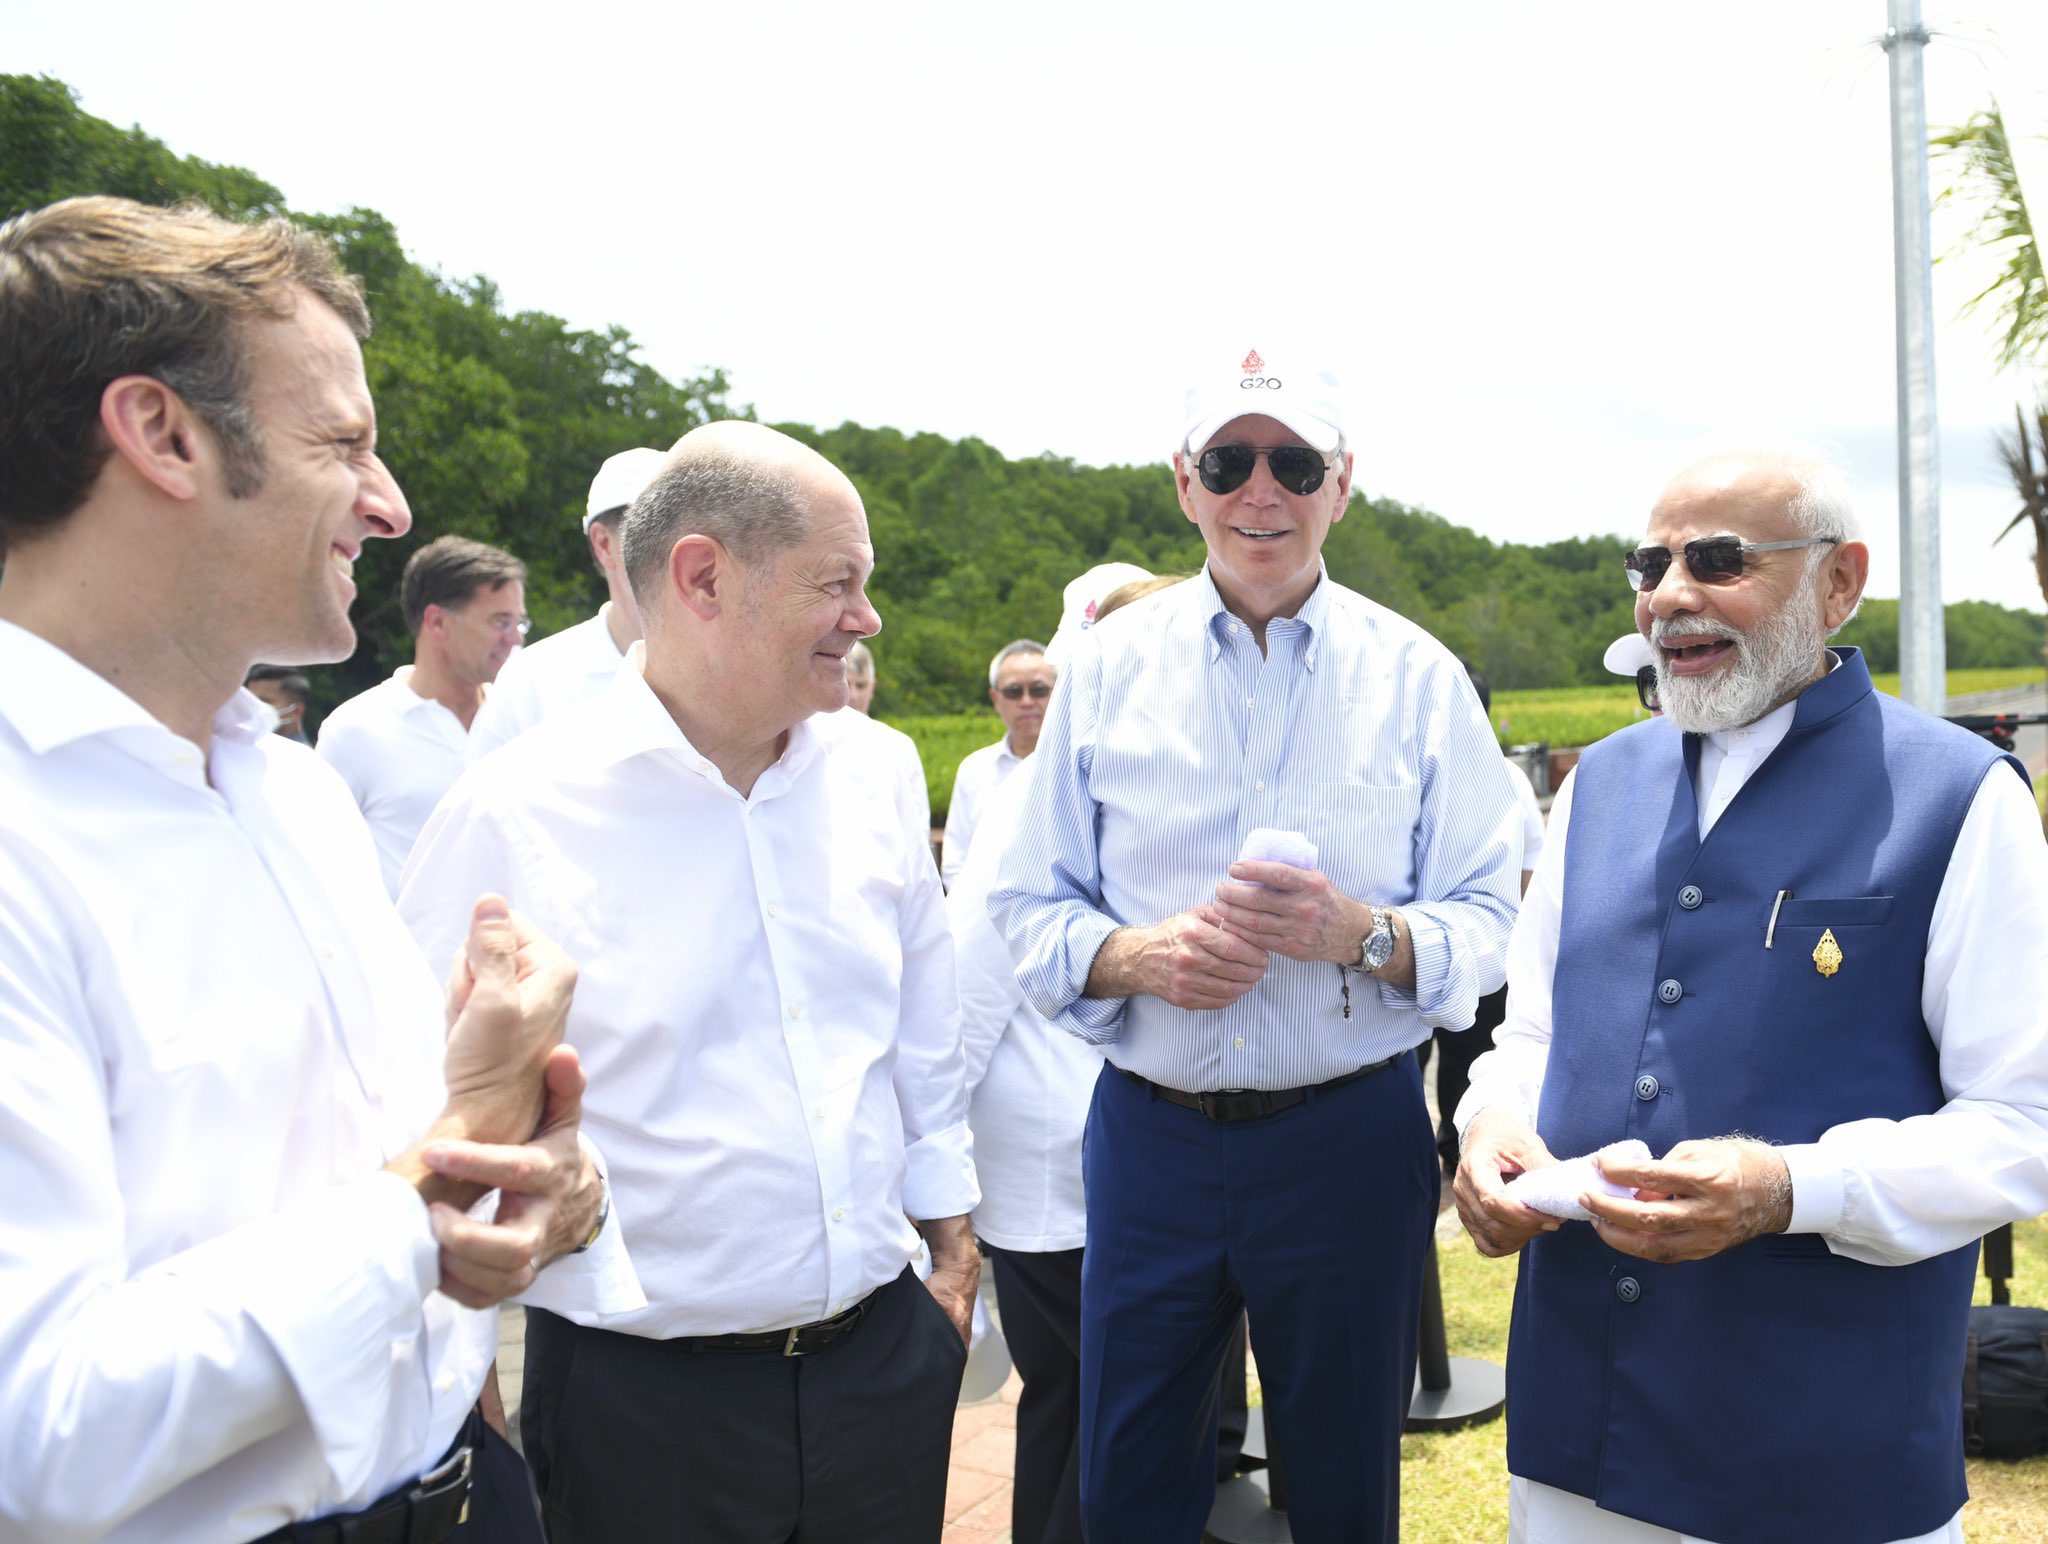 Prime Minister Modi at the 17th G20 Summit in Indonesia
